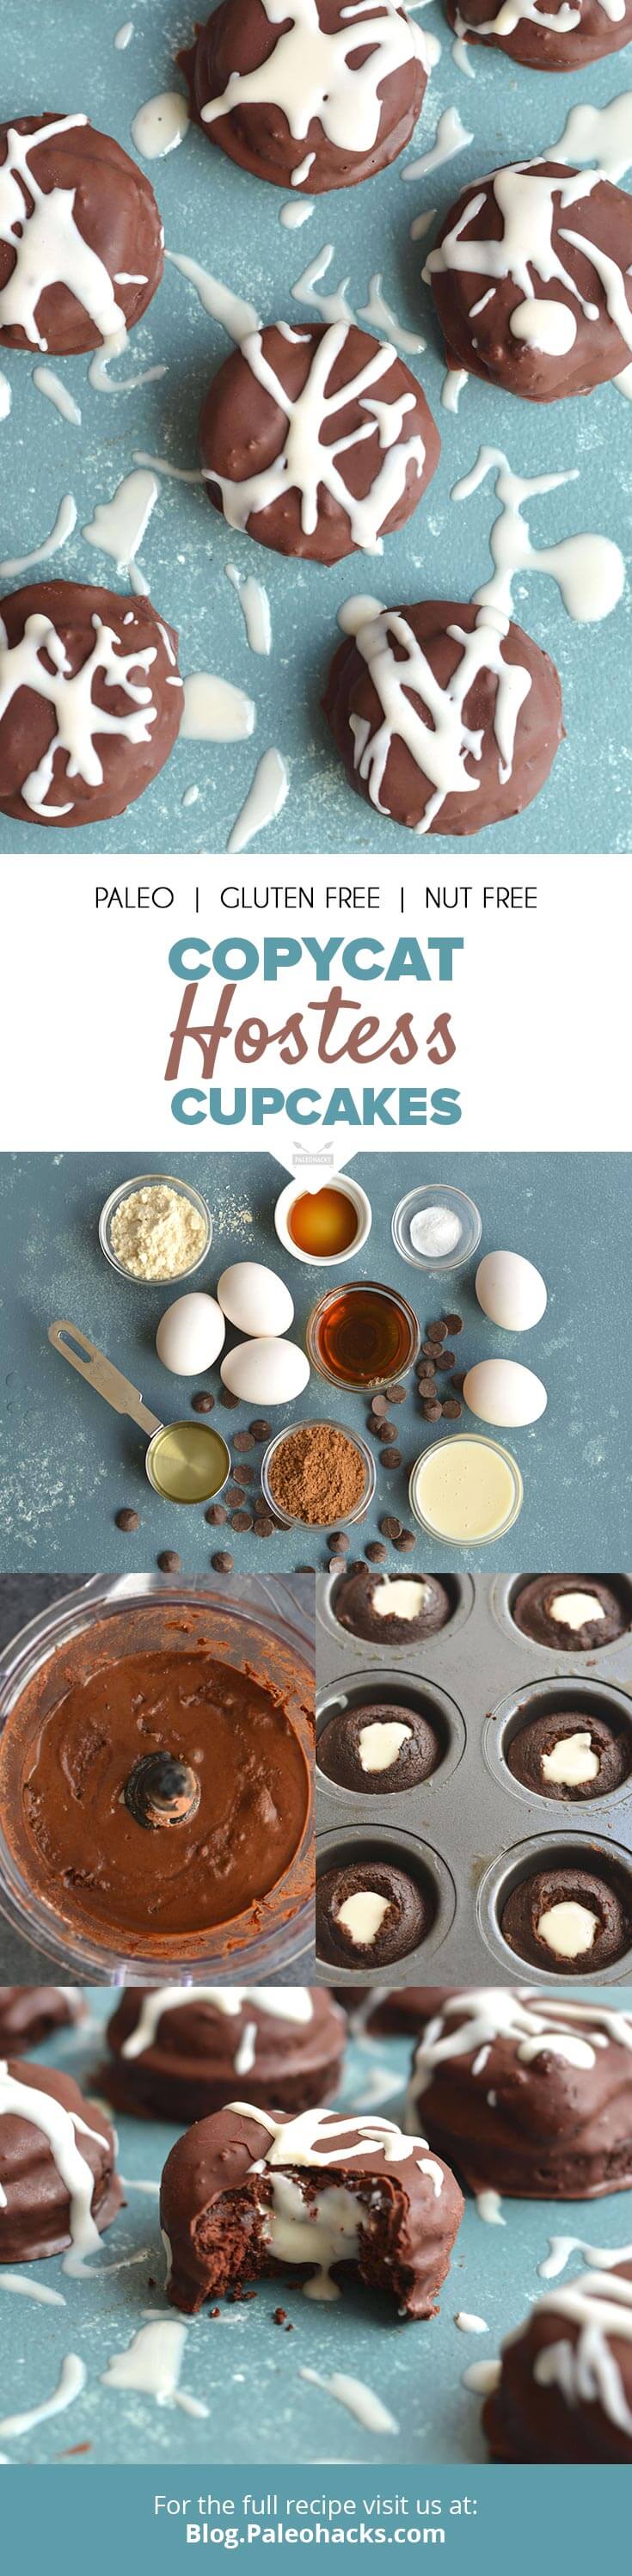 A classic treat gets a healthy makeover! These Copycat Hostess Cupcakes are fun to make, and even better to bite into!